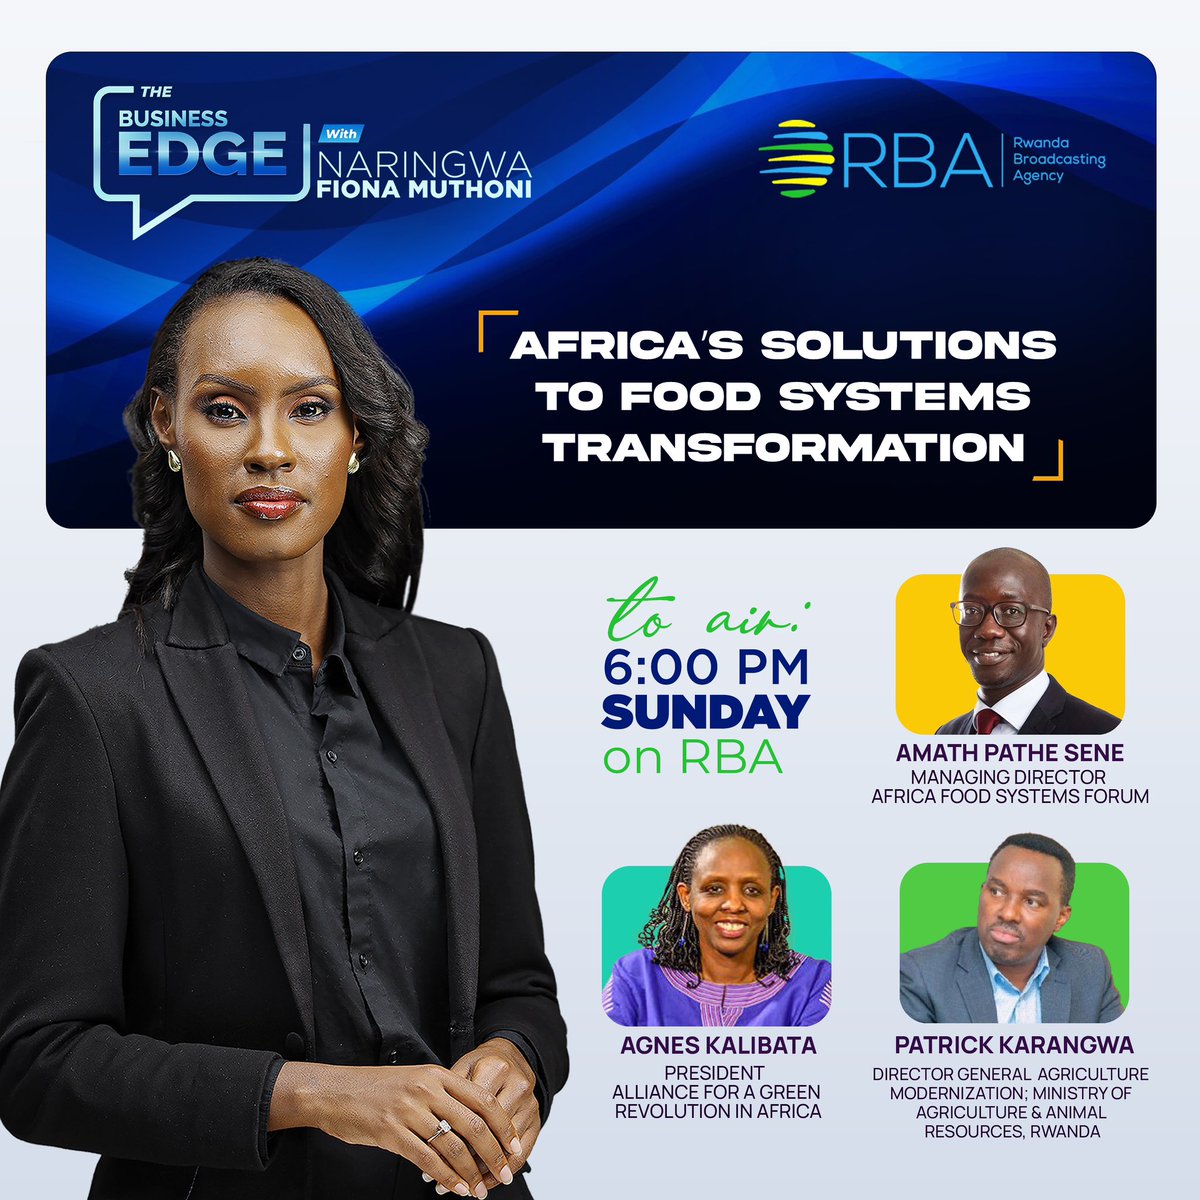 On today’s episode of the Business Edge, we look at initiatives aimed at revolutionizing food systems across the continent. We look at creating more resilient, equitable, and thriving ecosystem for Africa and beyond. Tune in at 6pm on @rbarwanda